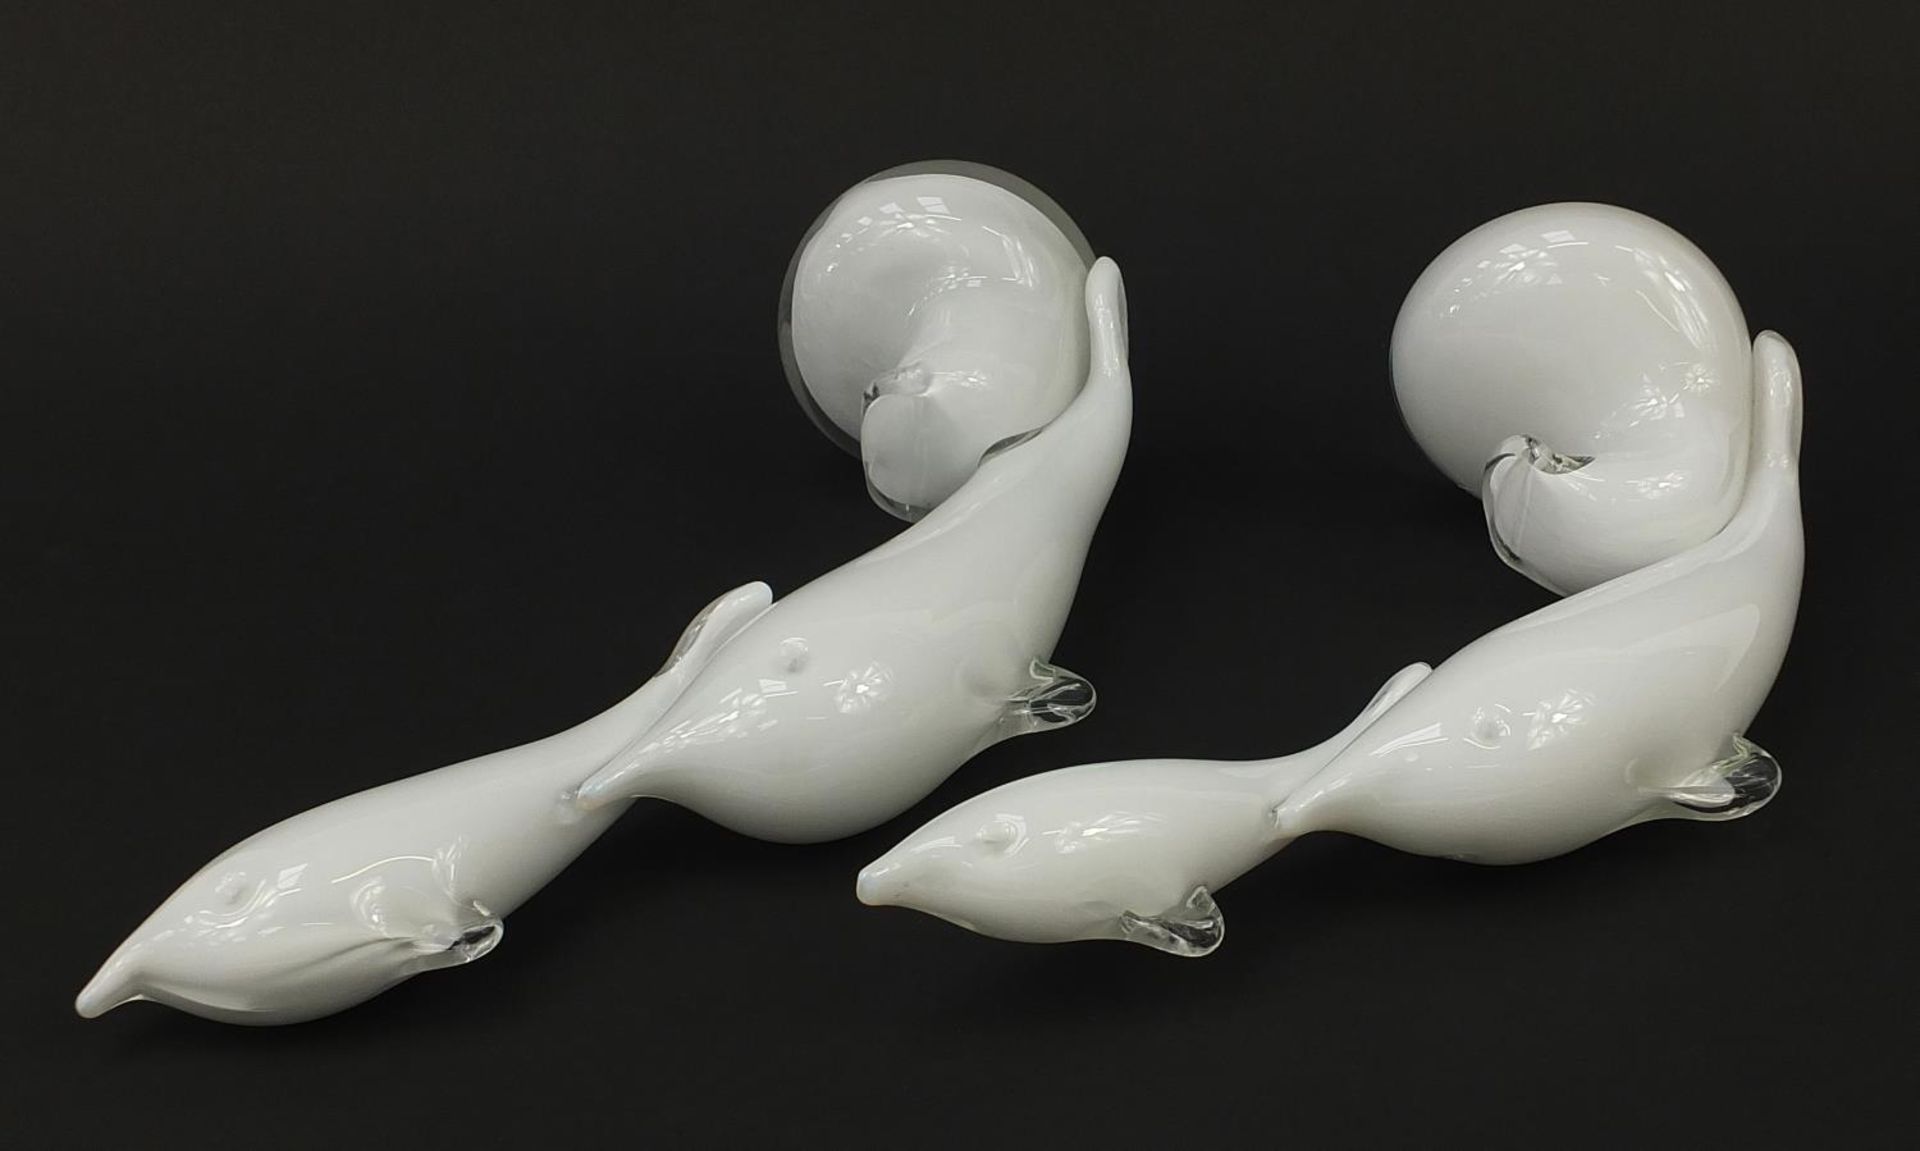 Pair of Murano style glass dolphin sculptures, the largest 33.5cm high - Image 3 of 5